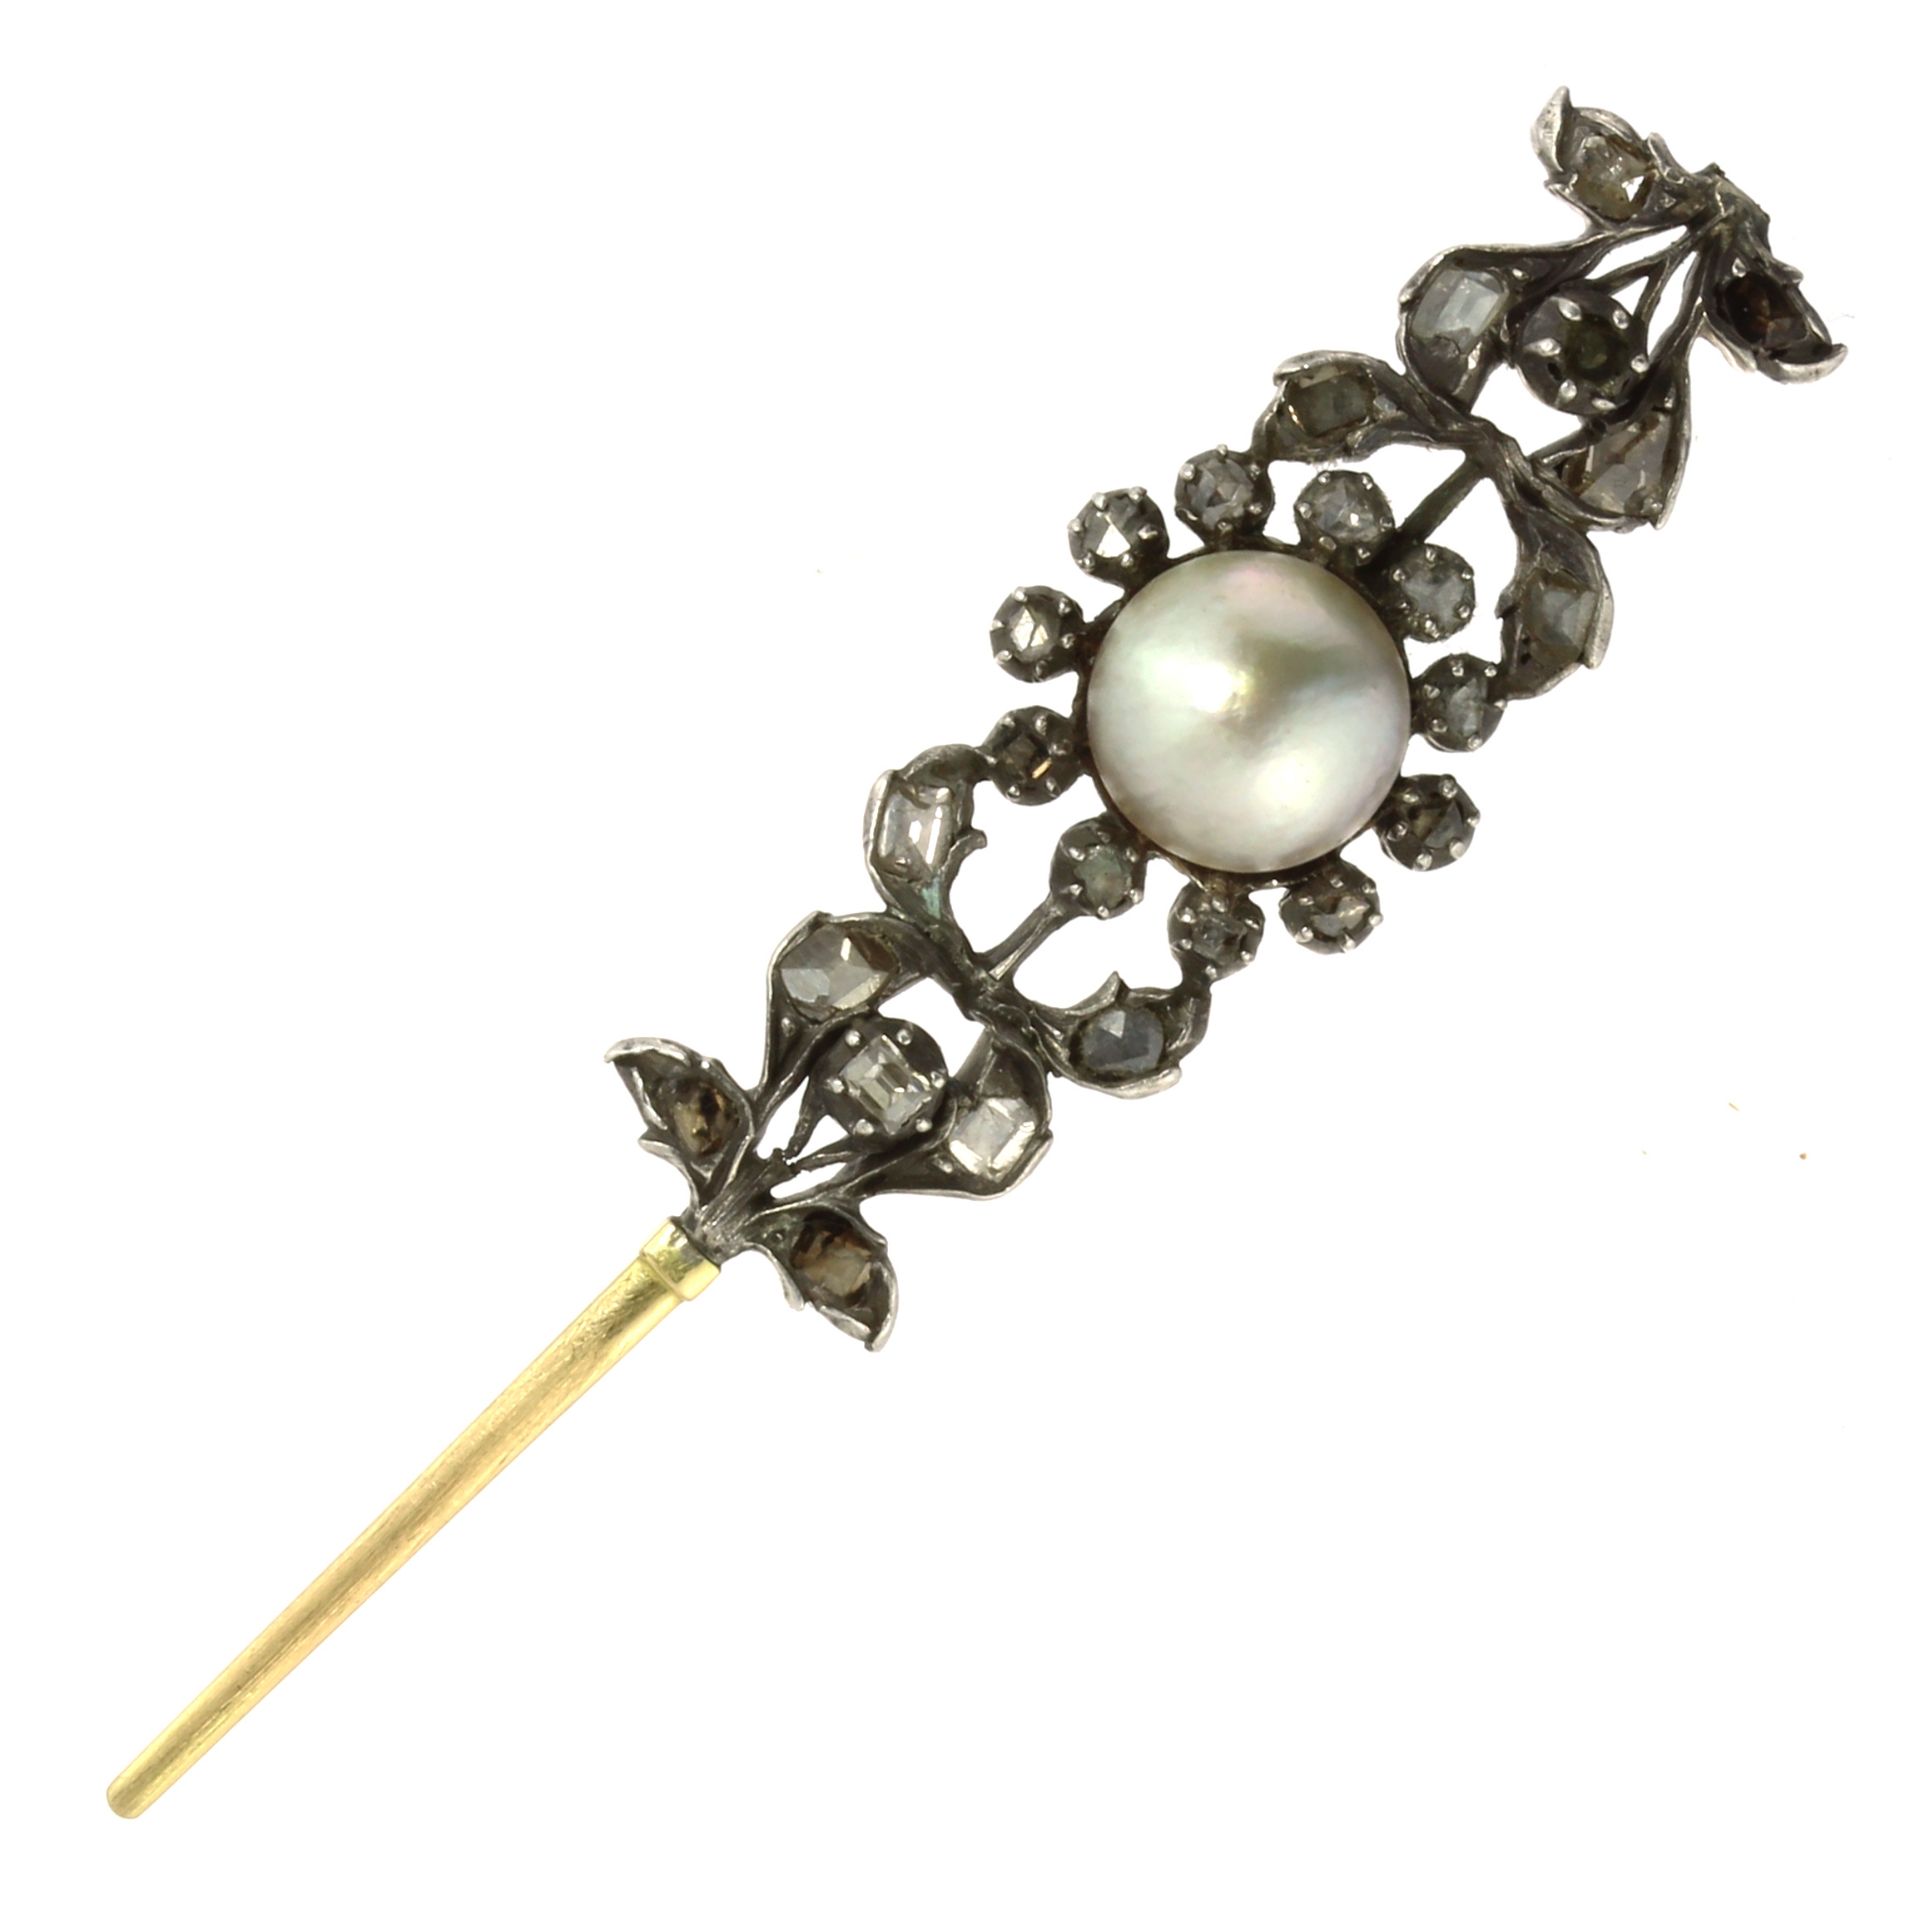 A PEARL AND DIAMOND HAT / LAPEL PIN, 19TH CENTURY set with a large, circular pearl surrounded by a